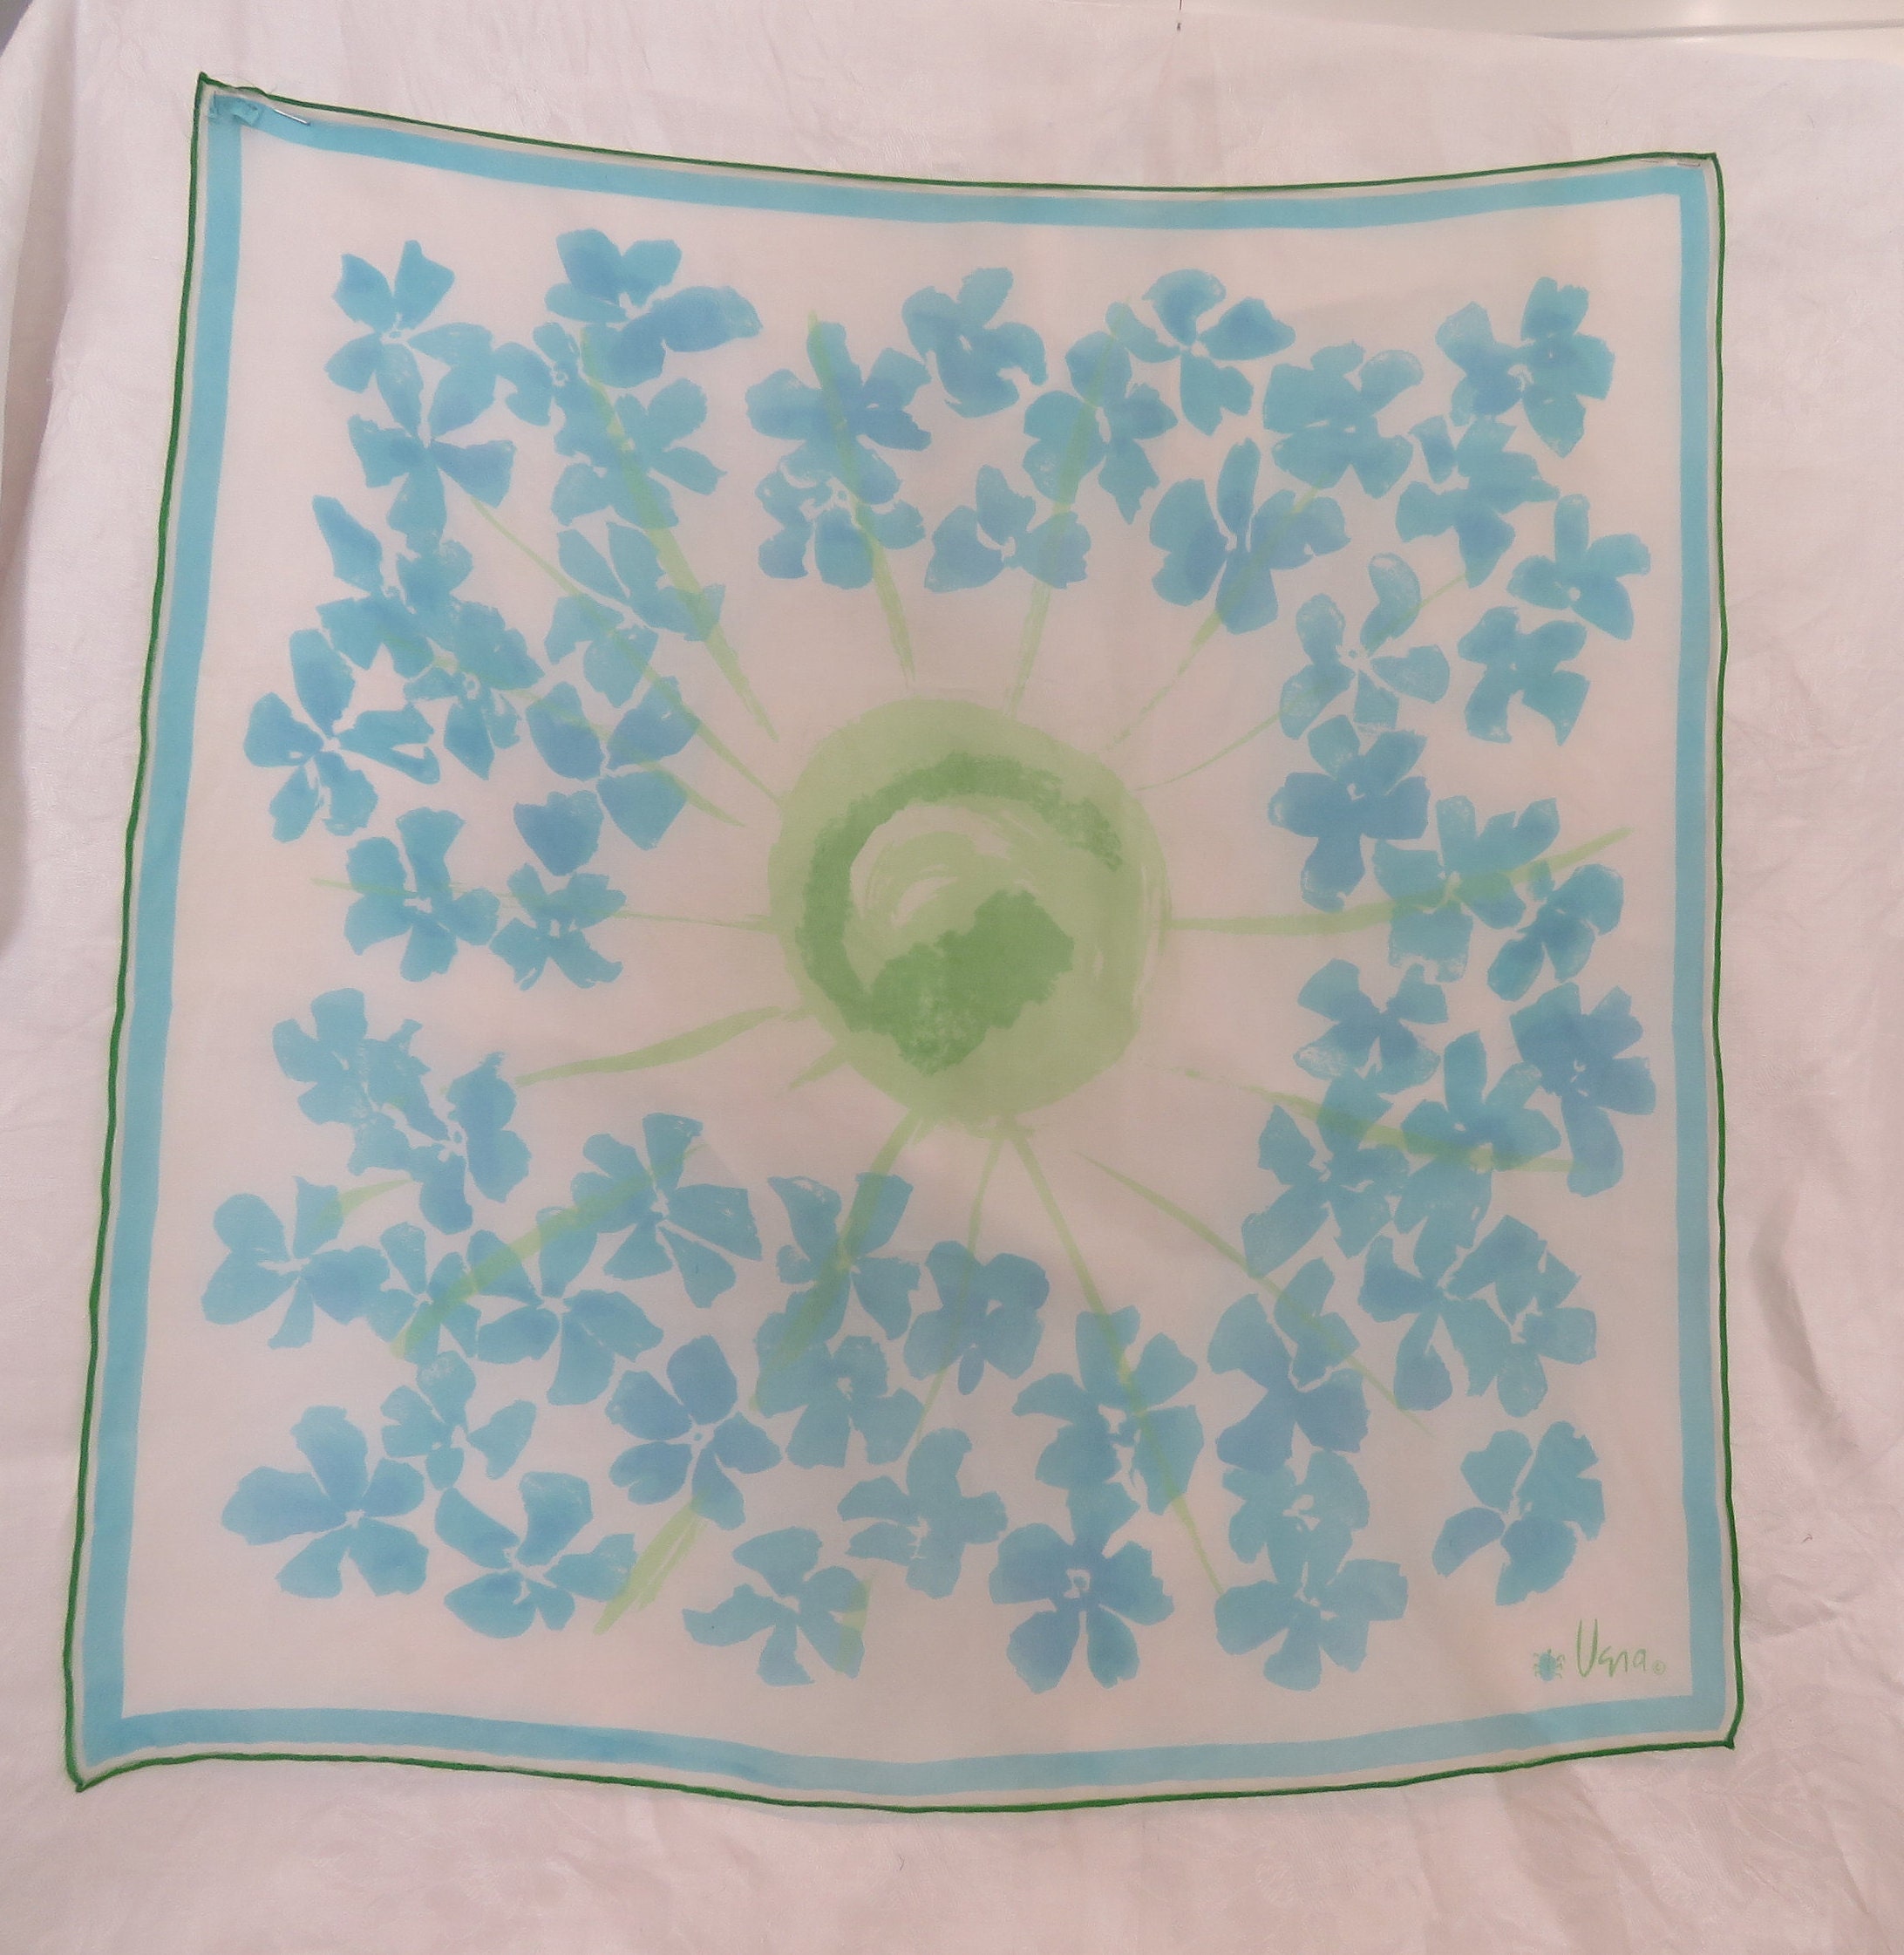 Silk Blend Scarf With Mod Cheerful Flowers & Sun Design in Green Blue Designed By Vera